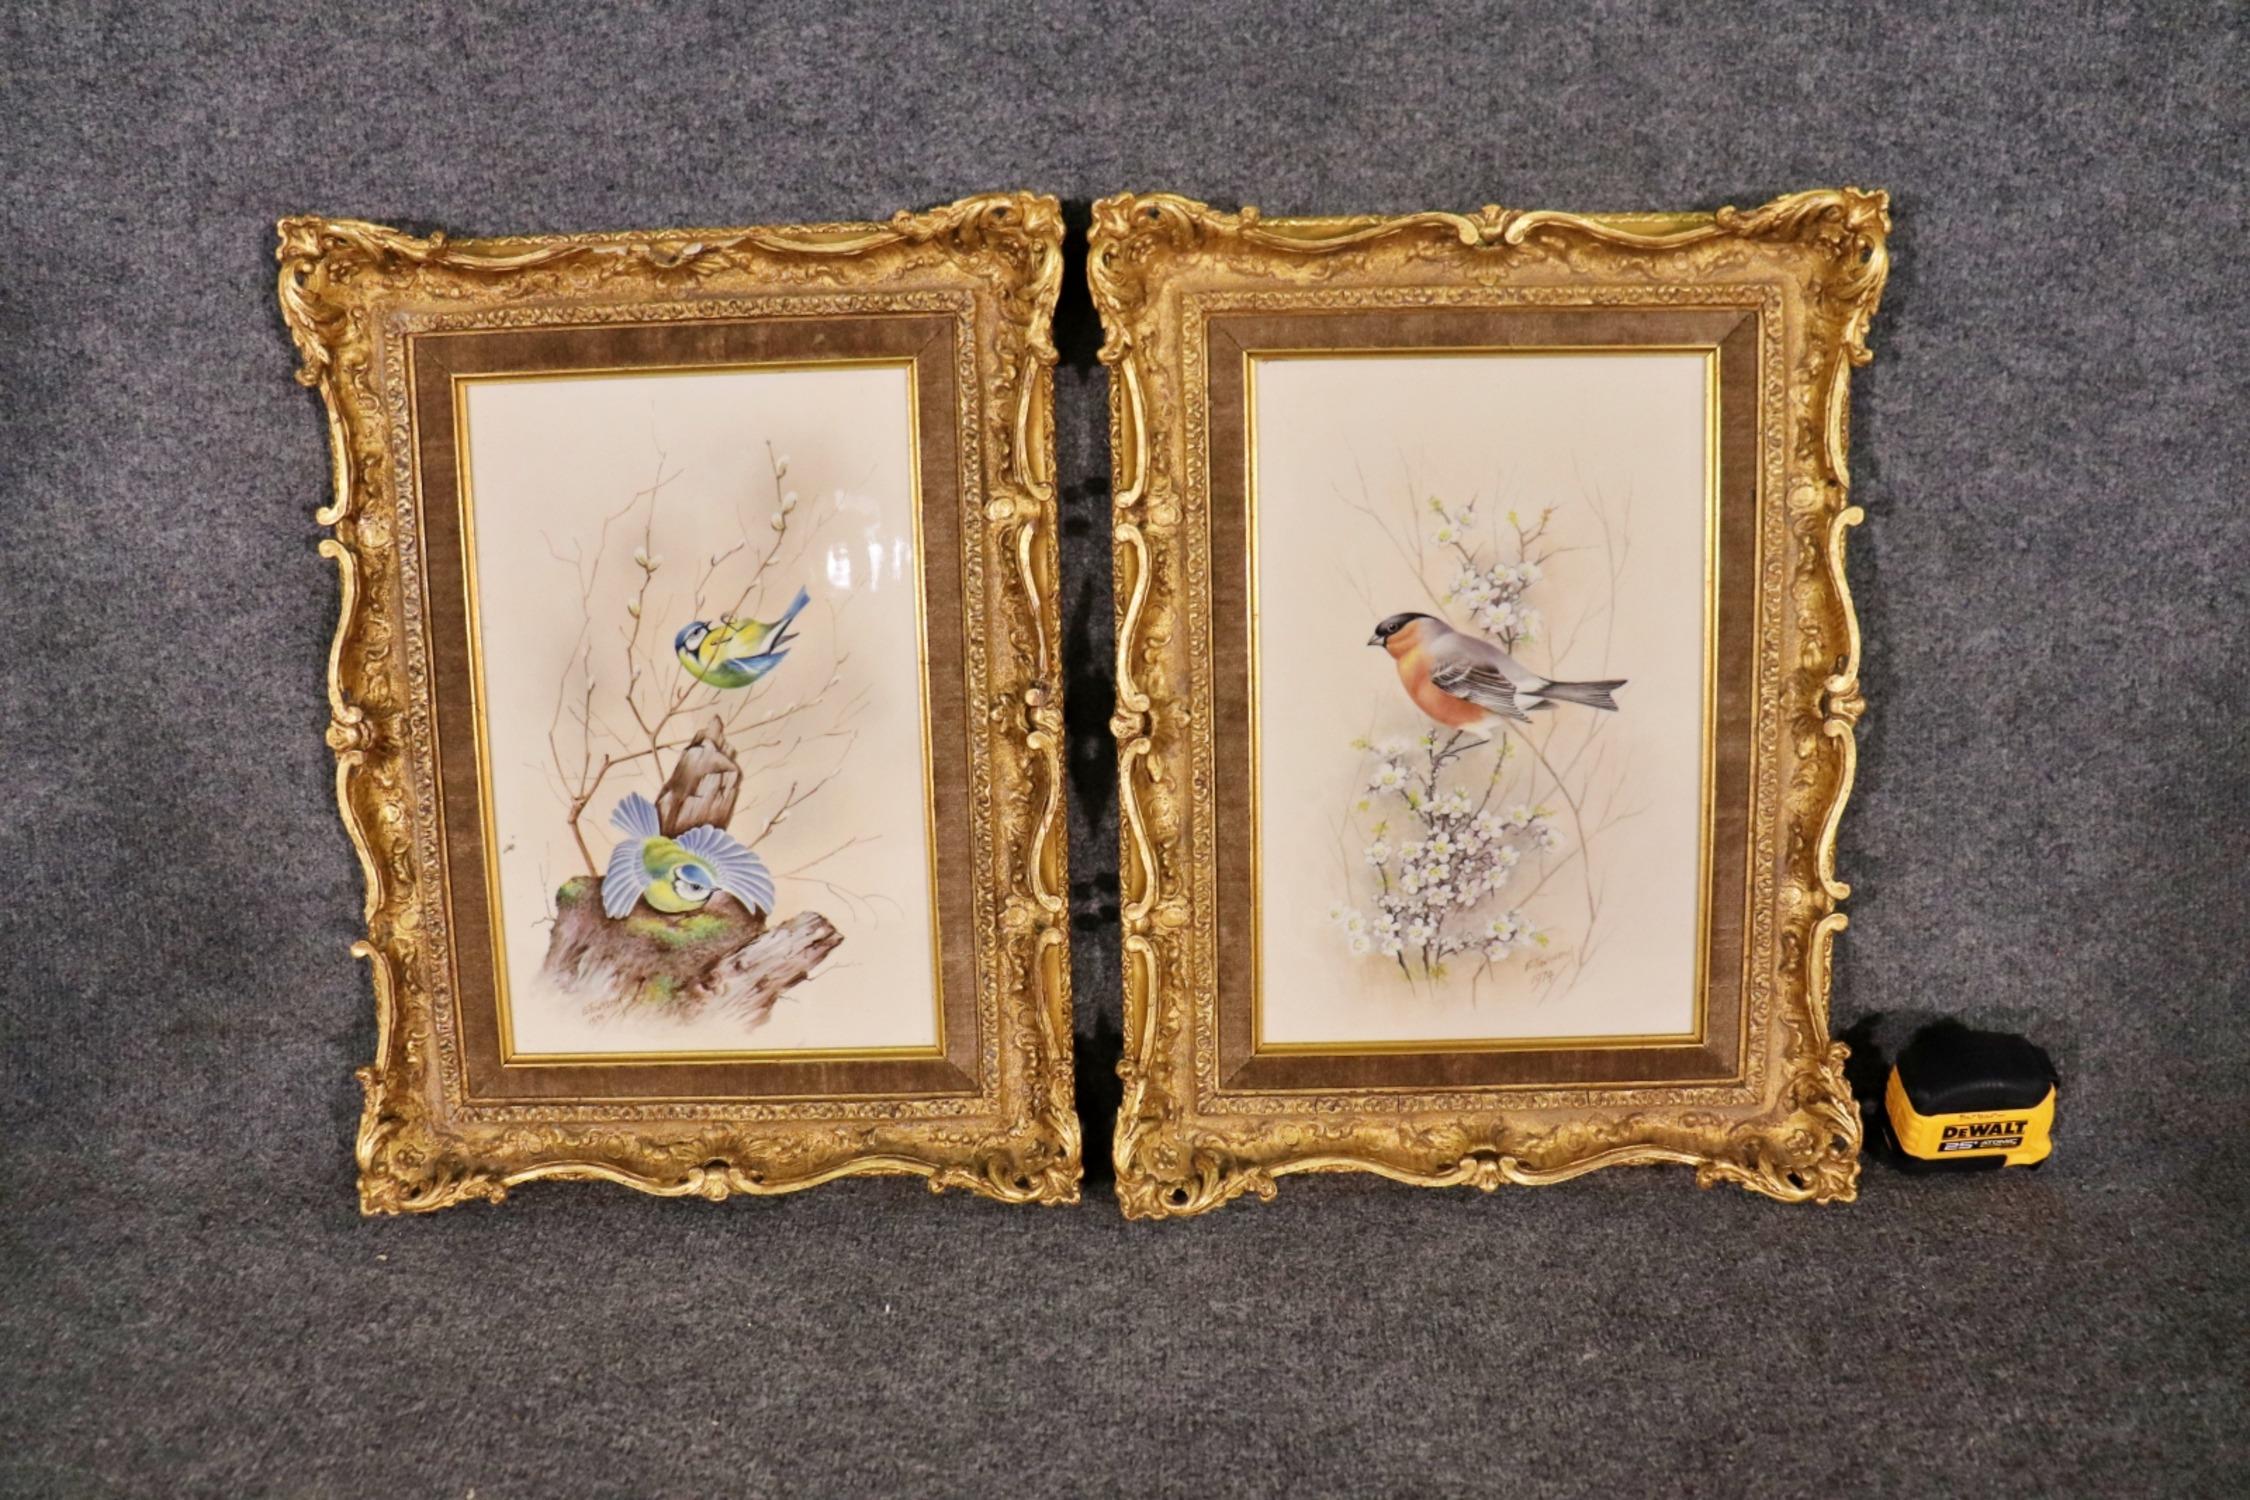 Signed E. Townsend and dated 1974. Number 14 (Bullfinch) and 15 (Blue - Tits) of 15. From a limited edition of 25 sets. British bird subjects by the Worcester Royal Porcelain Co. LTD. Hand carved frame commissioned by Royal Worcester. Measures 20